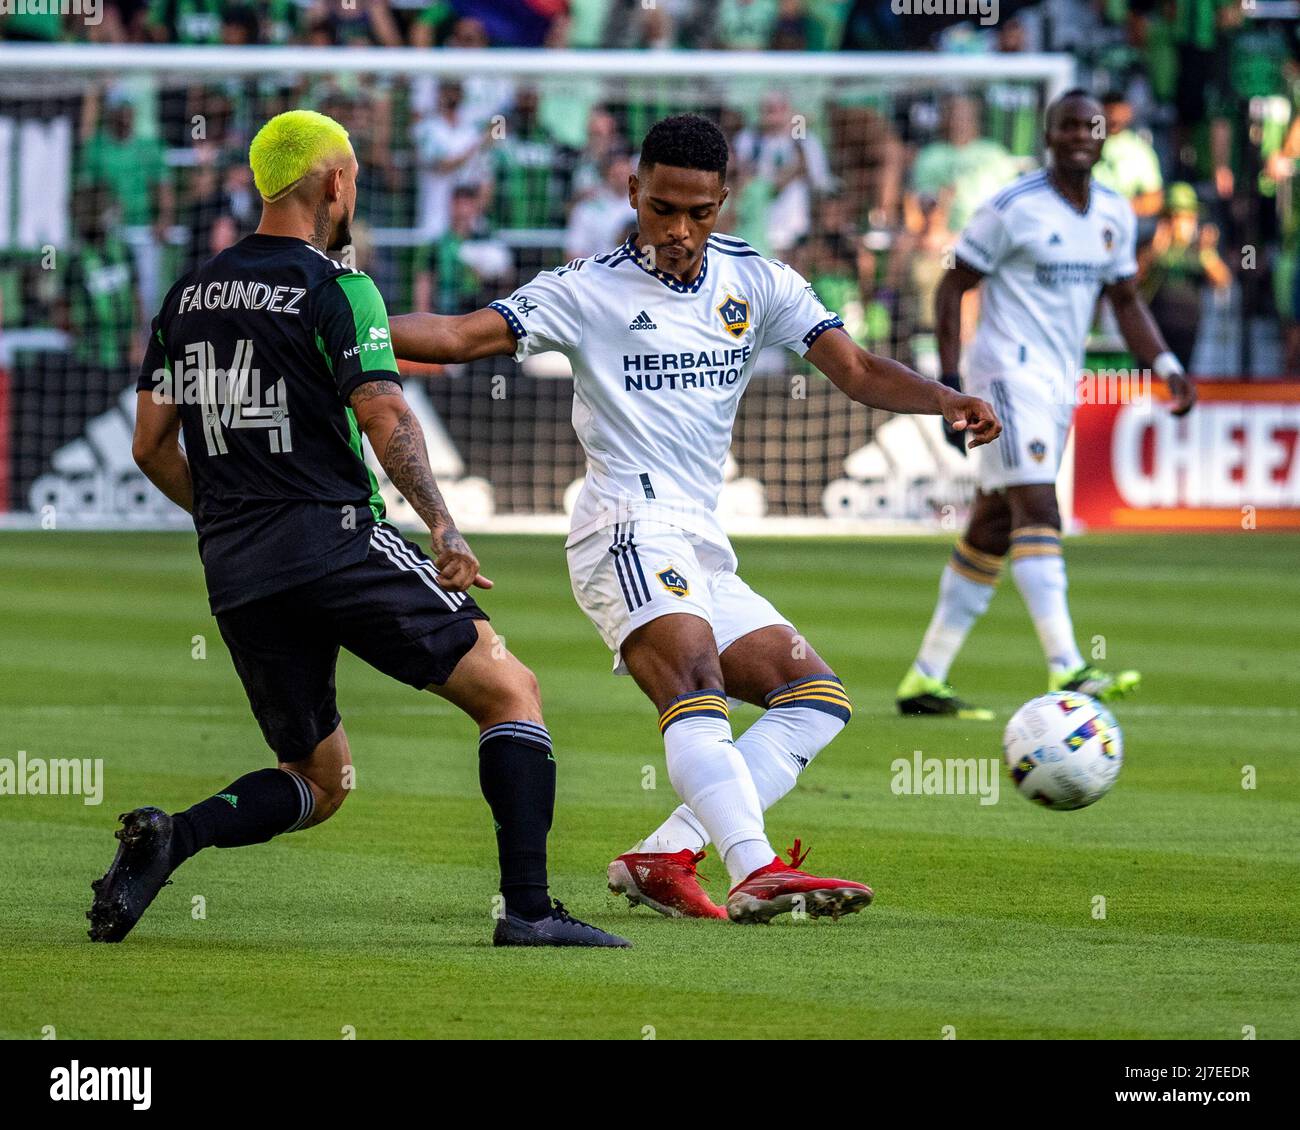 Austin Texas. May 8, 2022. Rayan Raveloson #6 of the L.A. Galaxy in action vs Austin FC at Q2 Stadium in Austin Texas. The Galaxy defeat Austin FC 1-0. Stock Photo